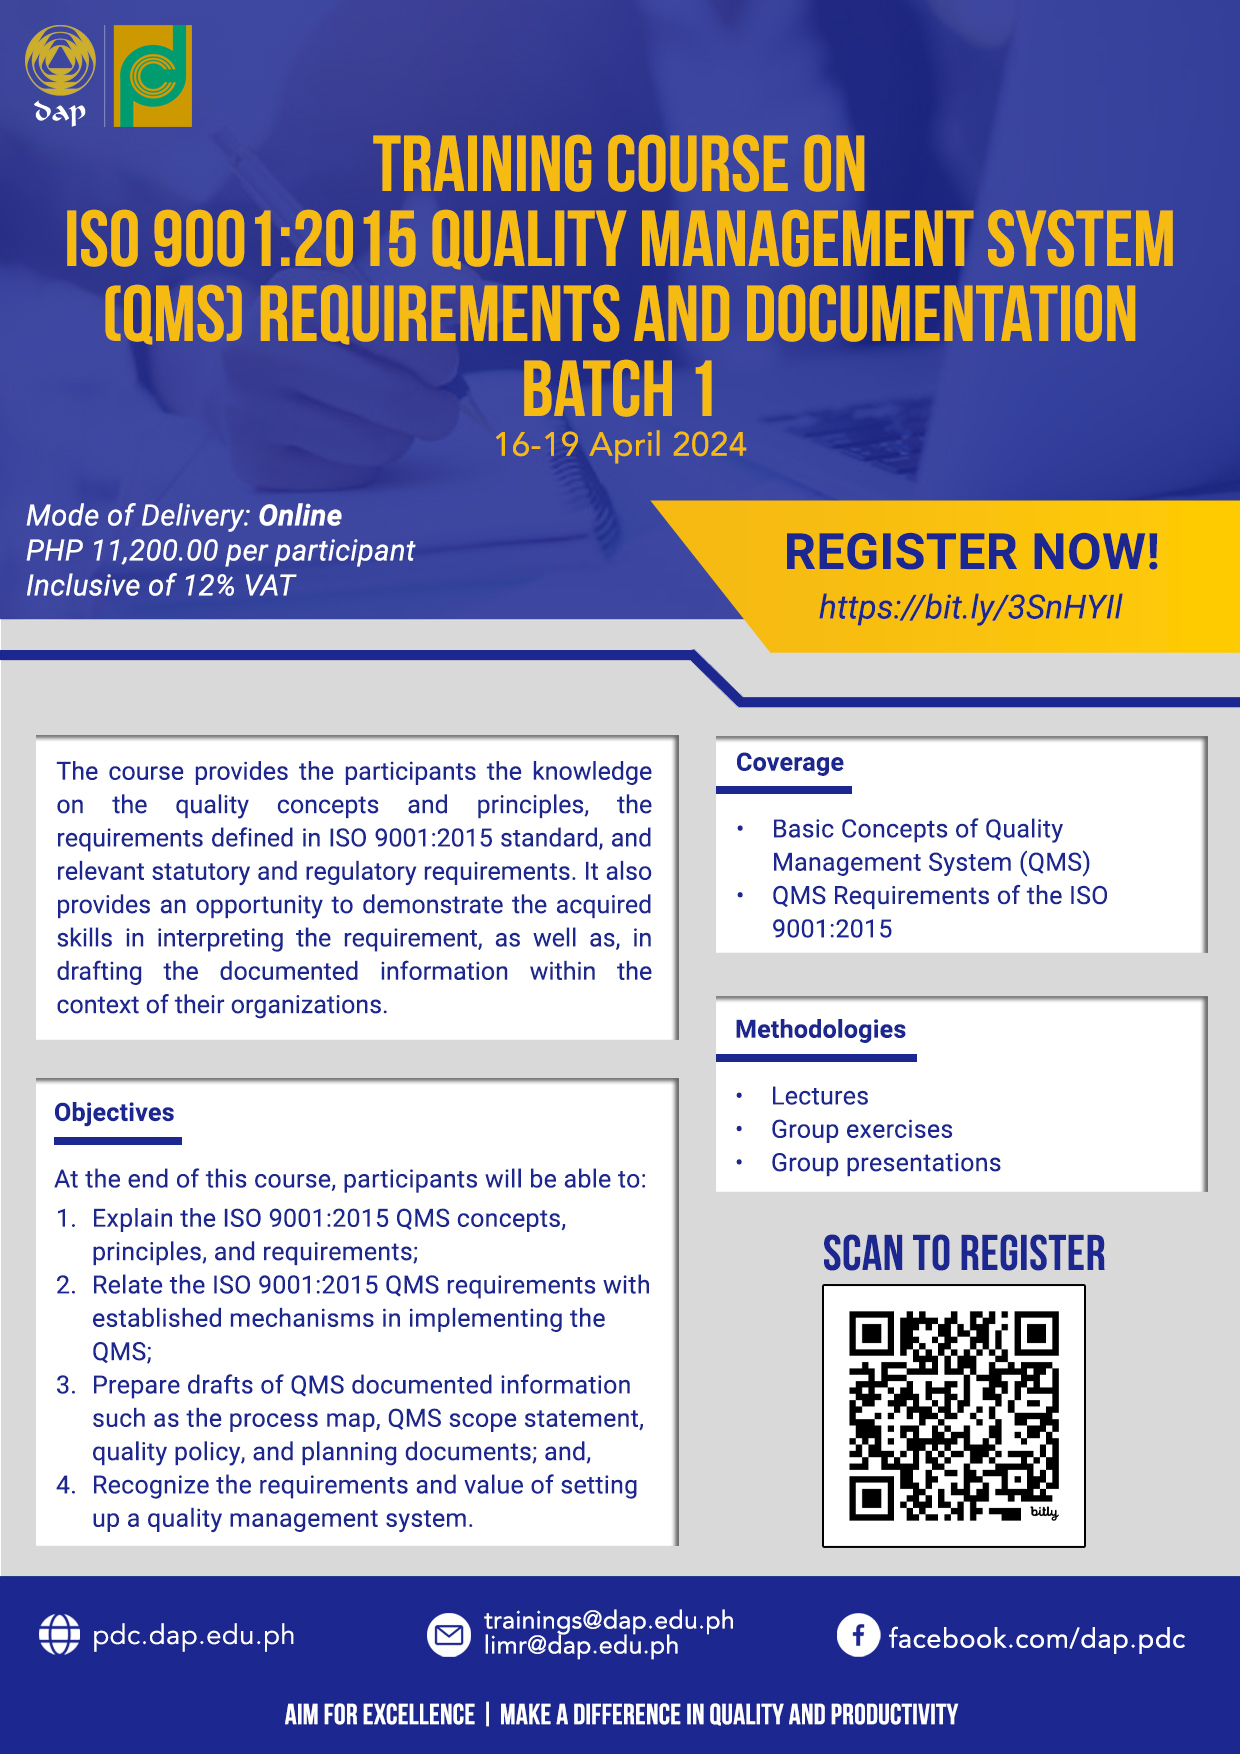 Training Course on ISO 9001:2015 Quality Management System Requirements and Documentation (Batch 1) - Online